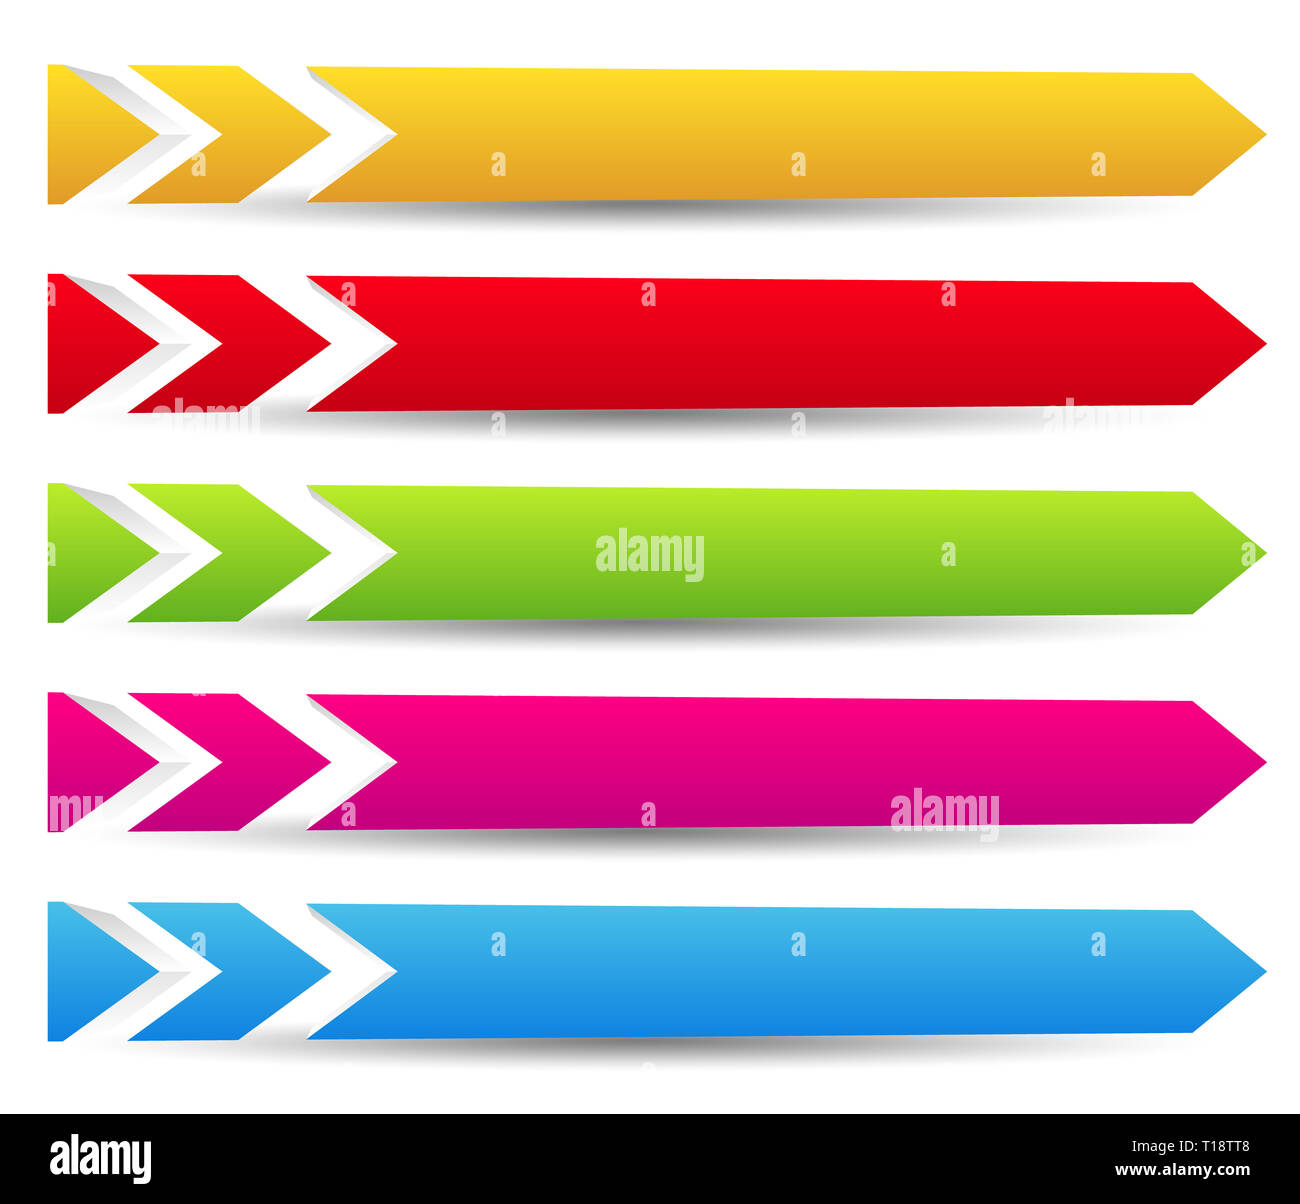 Horizontal Banner Or Button Templates With Blank Space For Your Message 3d Banners With Arrows Arrowheads Colorful Design Elements Stock Photo Alamy